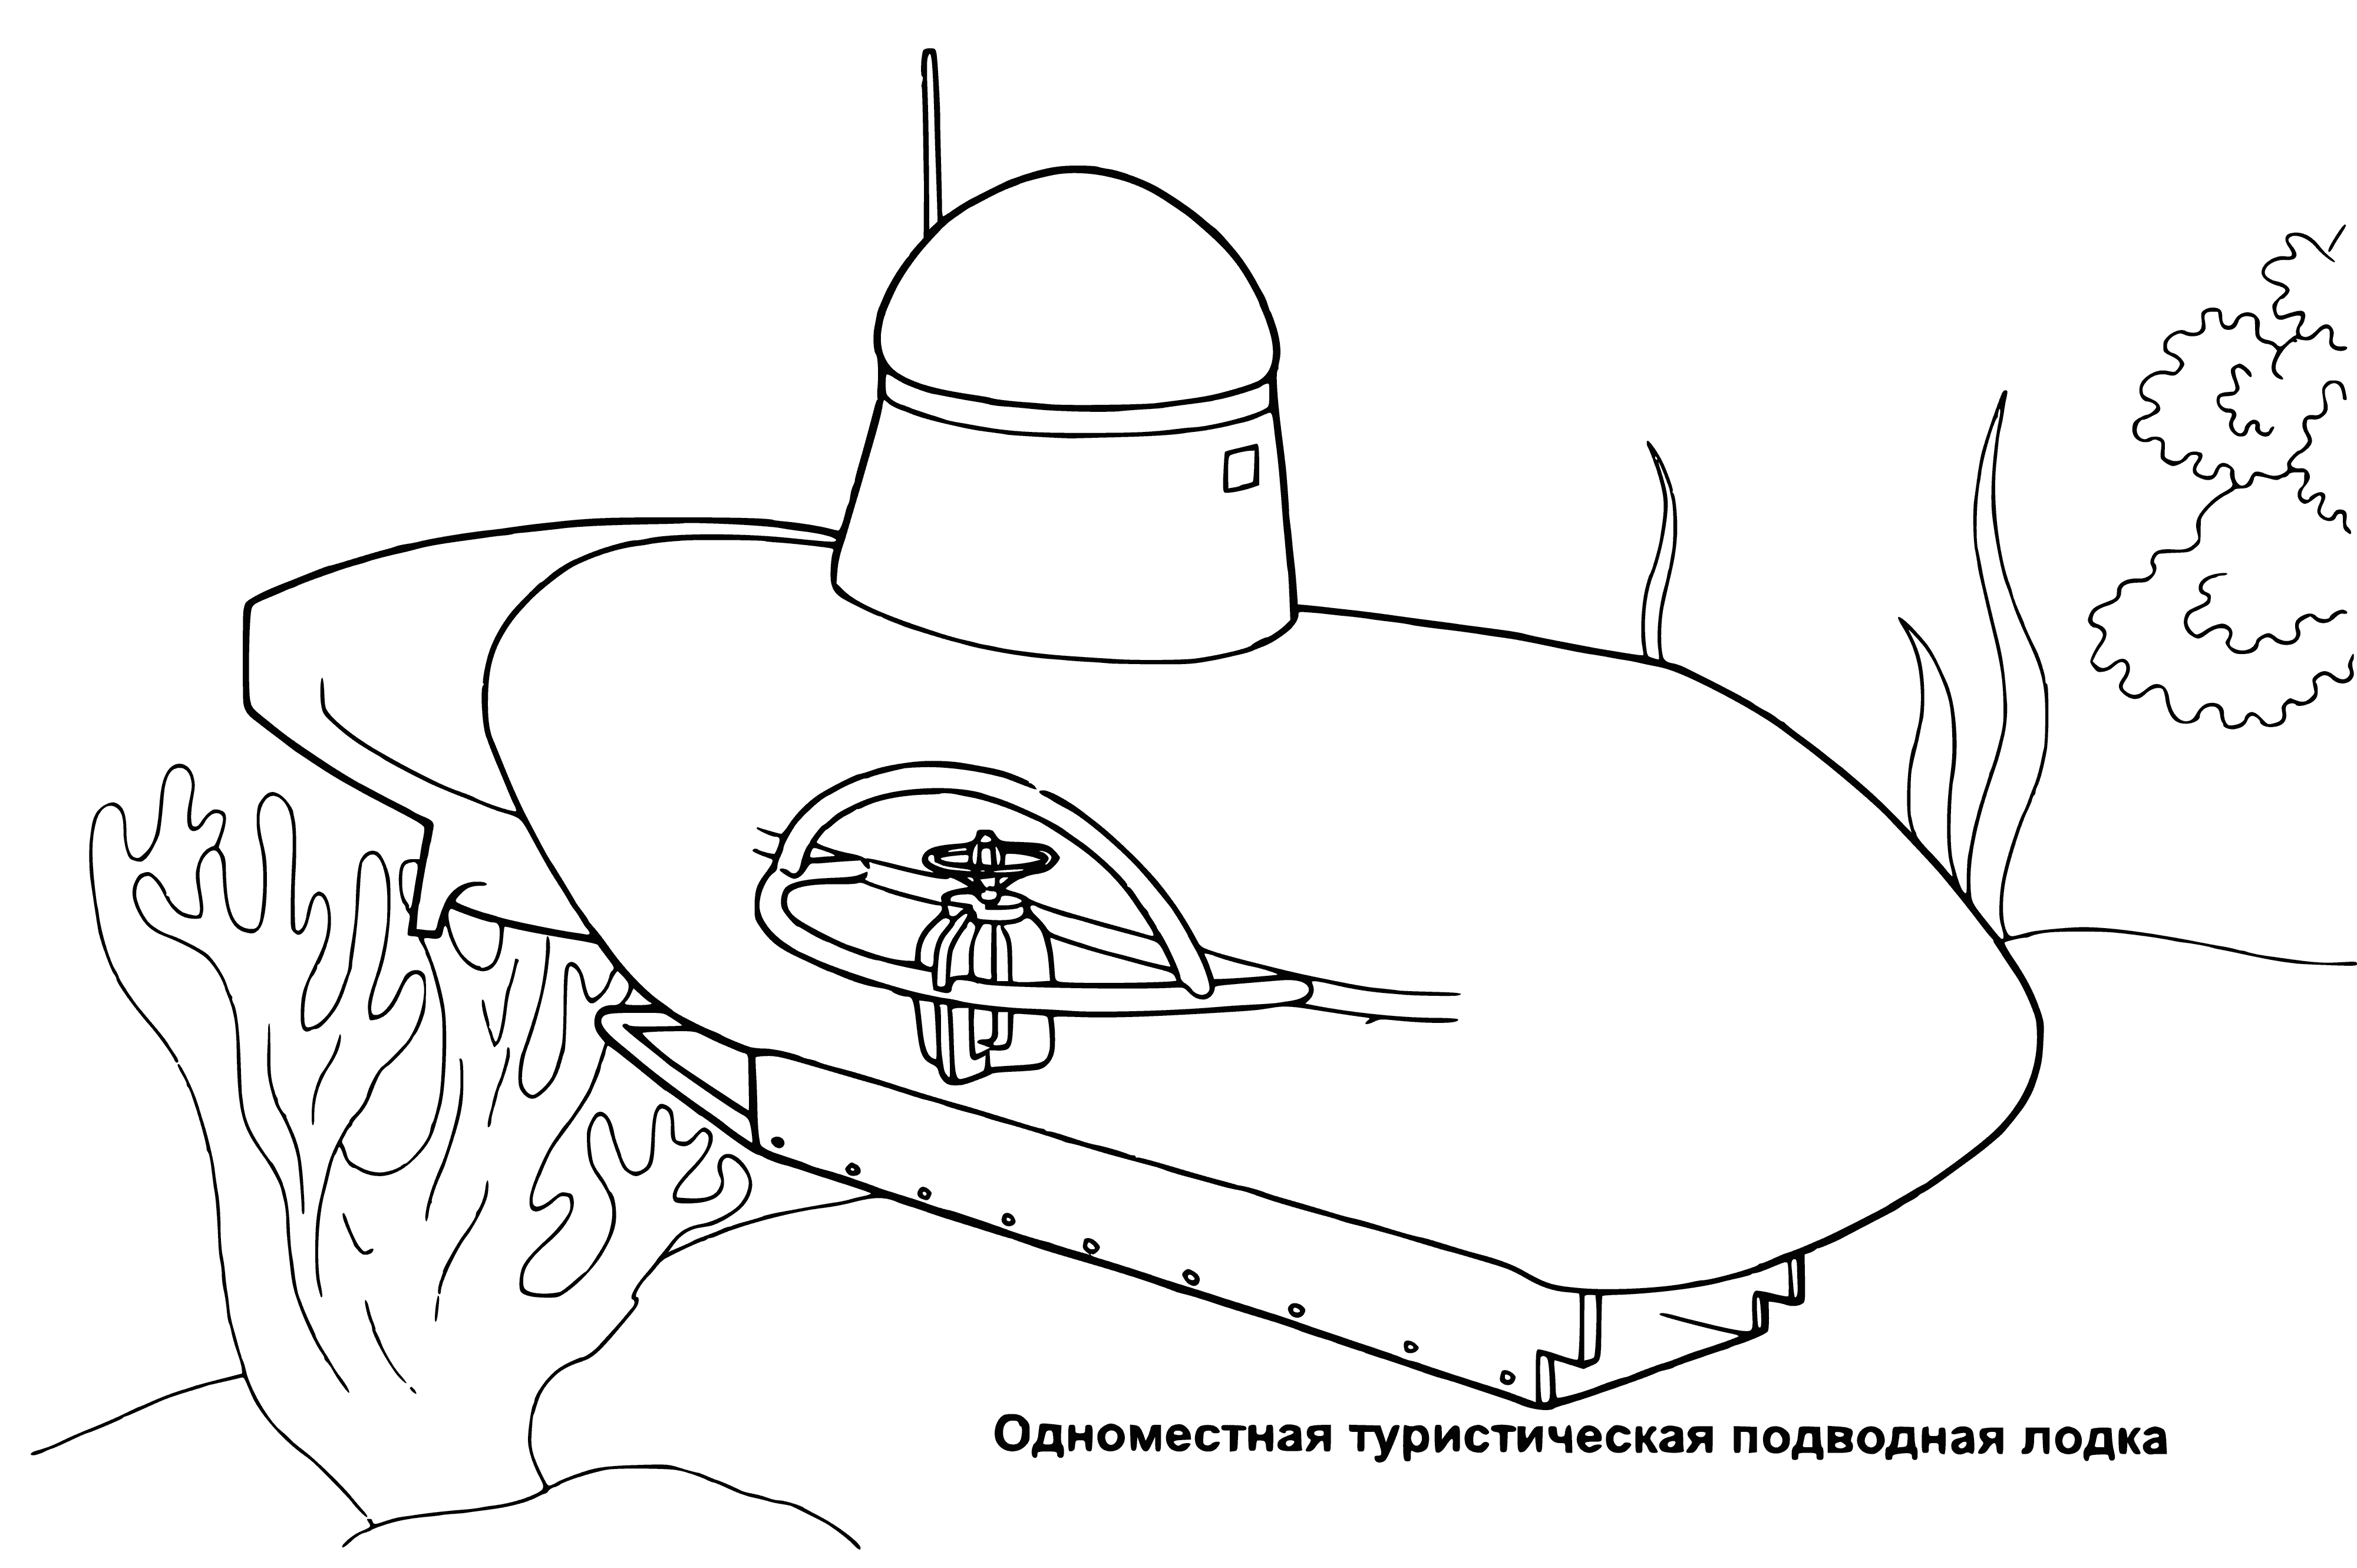 coloring page: Submarine in water is gray, long and cylindrical, with conning tower on top. #submarine